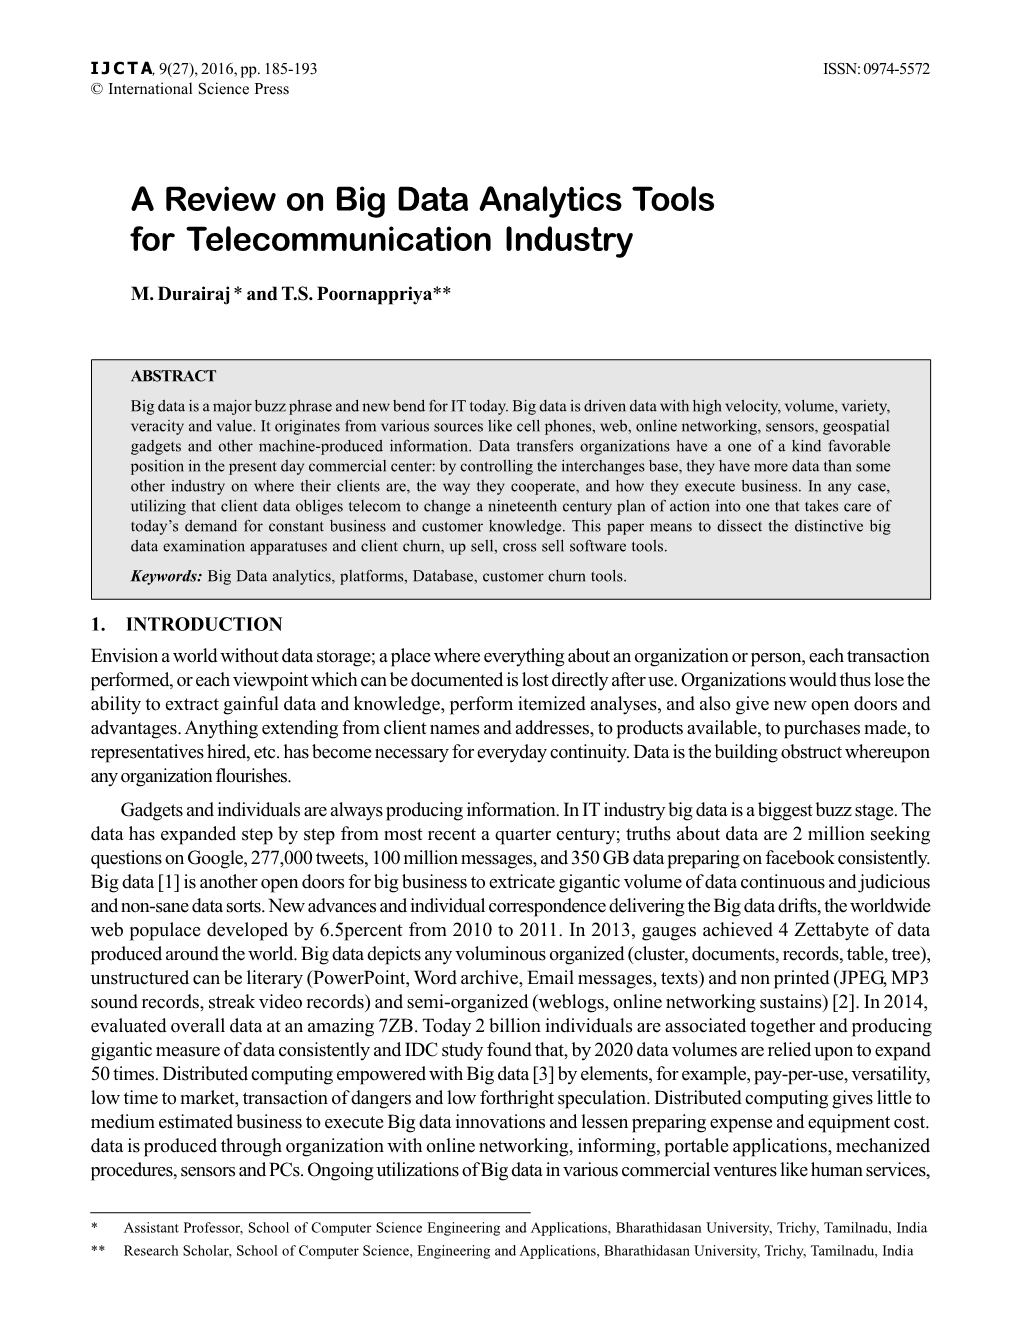 A Review on Big Data Analytics Tools for Telecommunication Industry